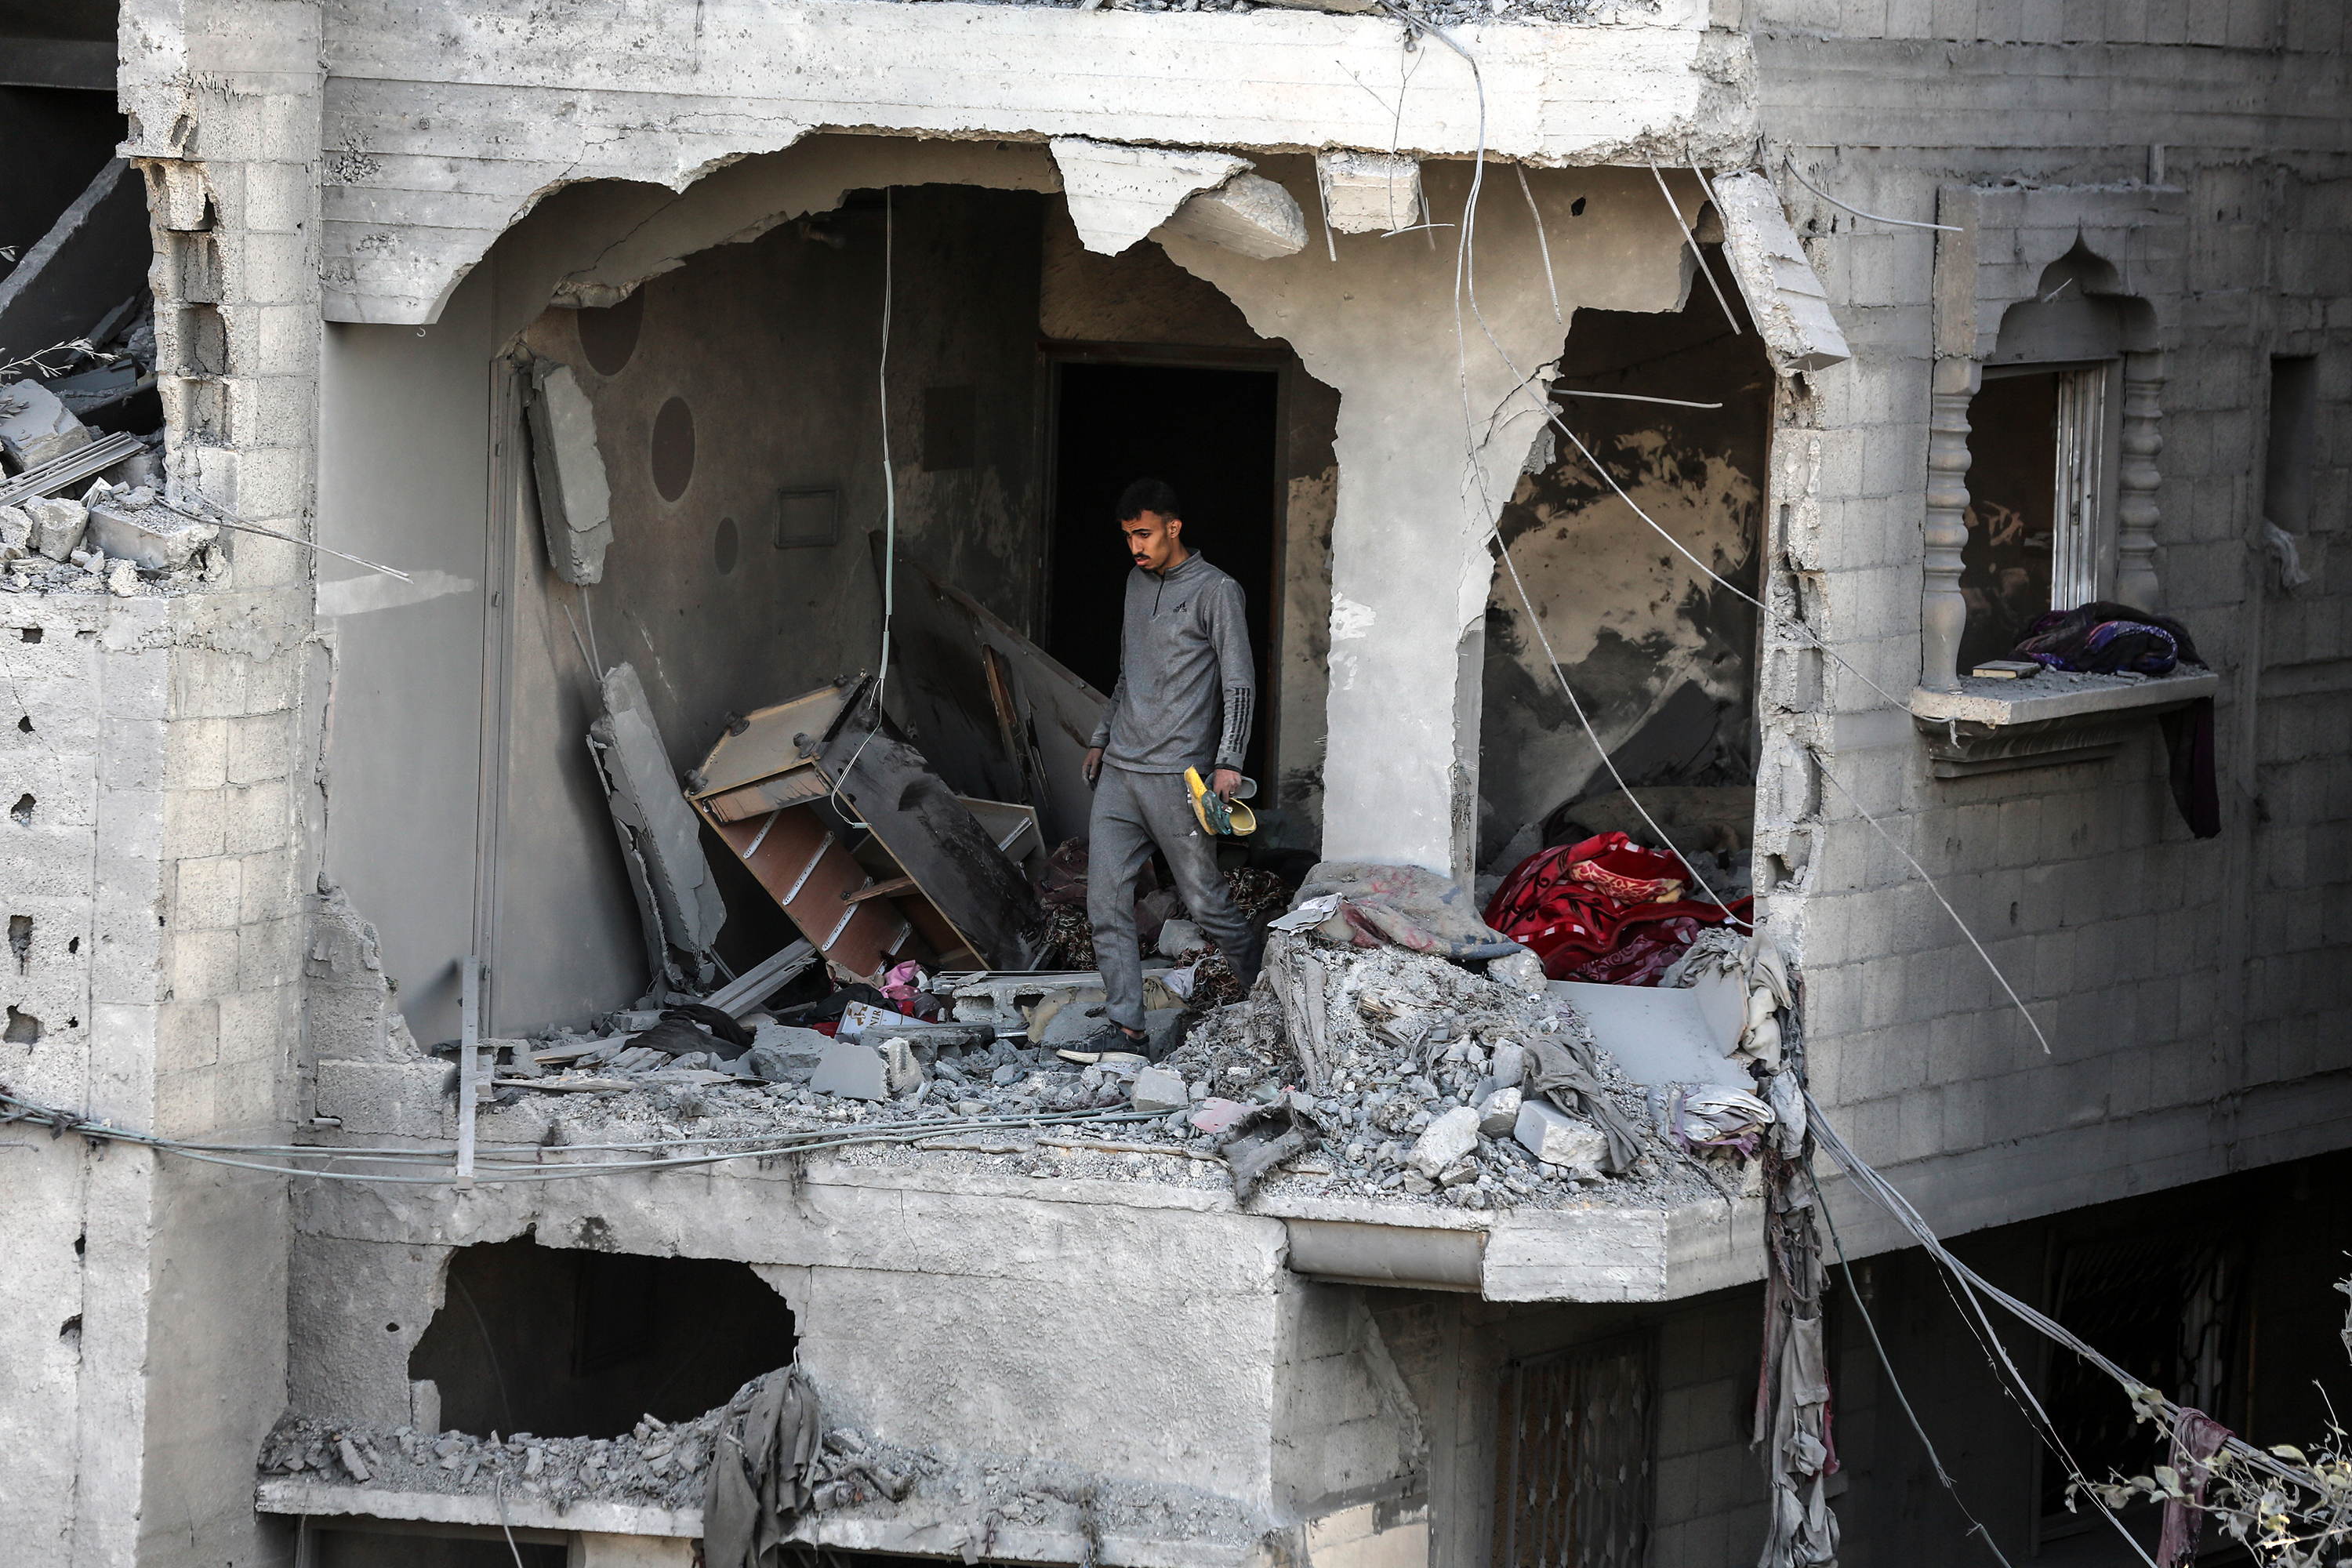 Palestinians inspect the debris of a house destroyed by Israeli bombing in Deir al-Balah, Gaza, on March 4.